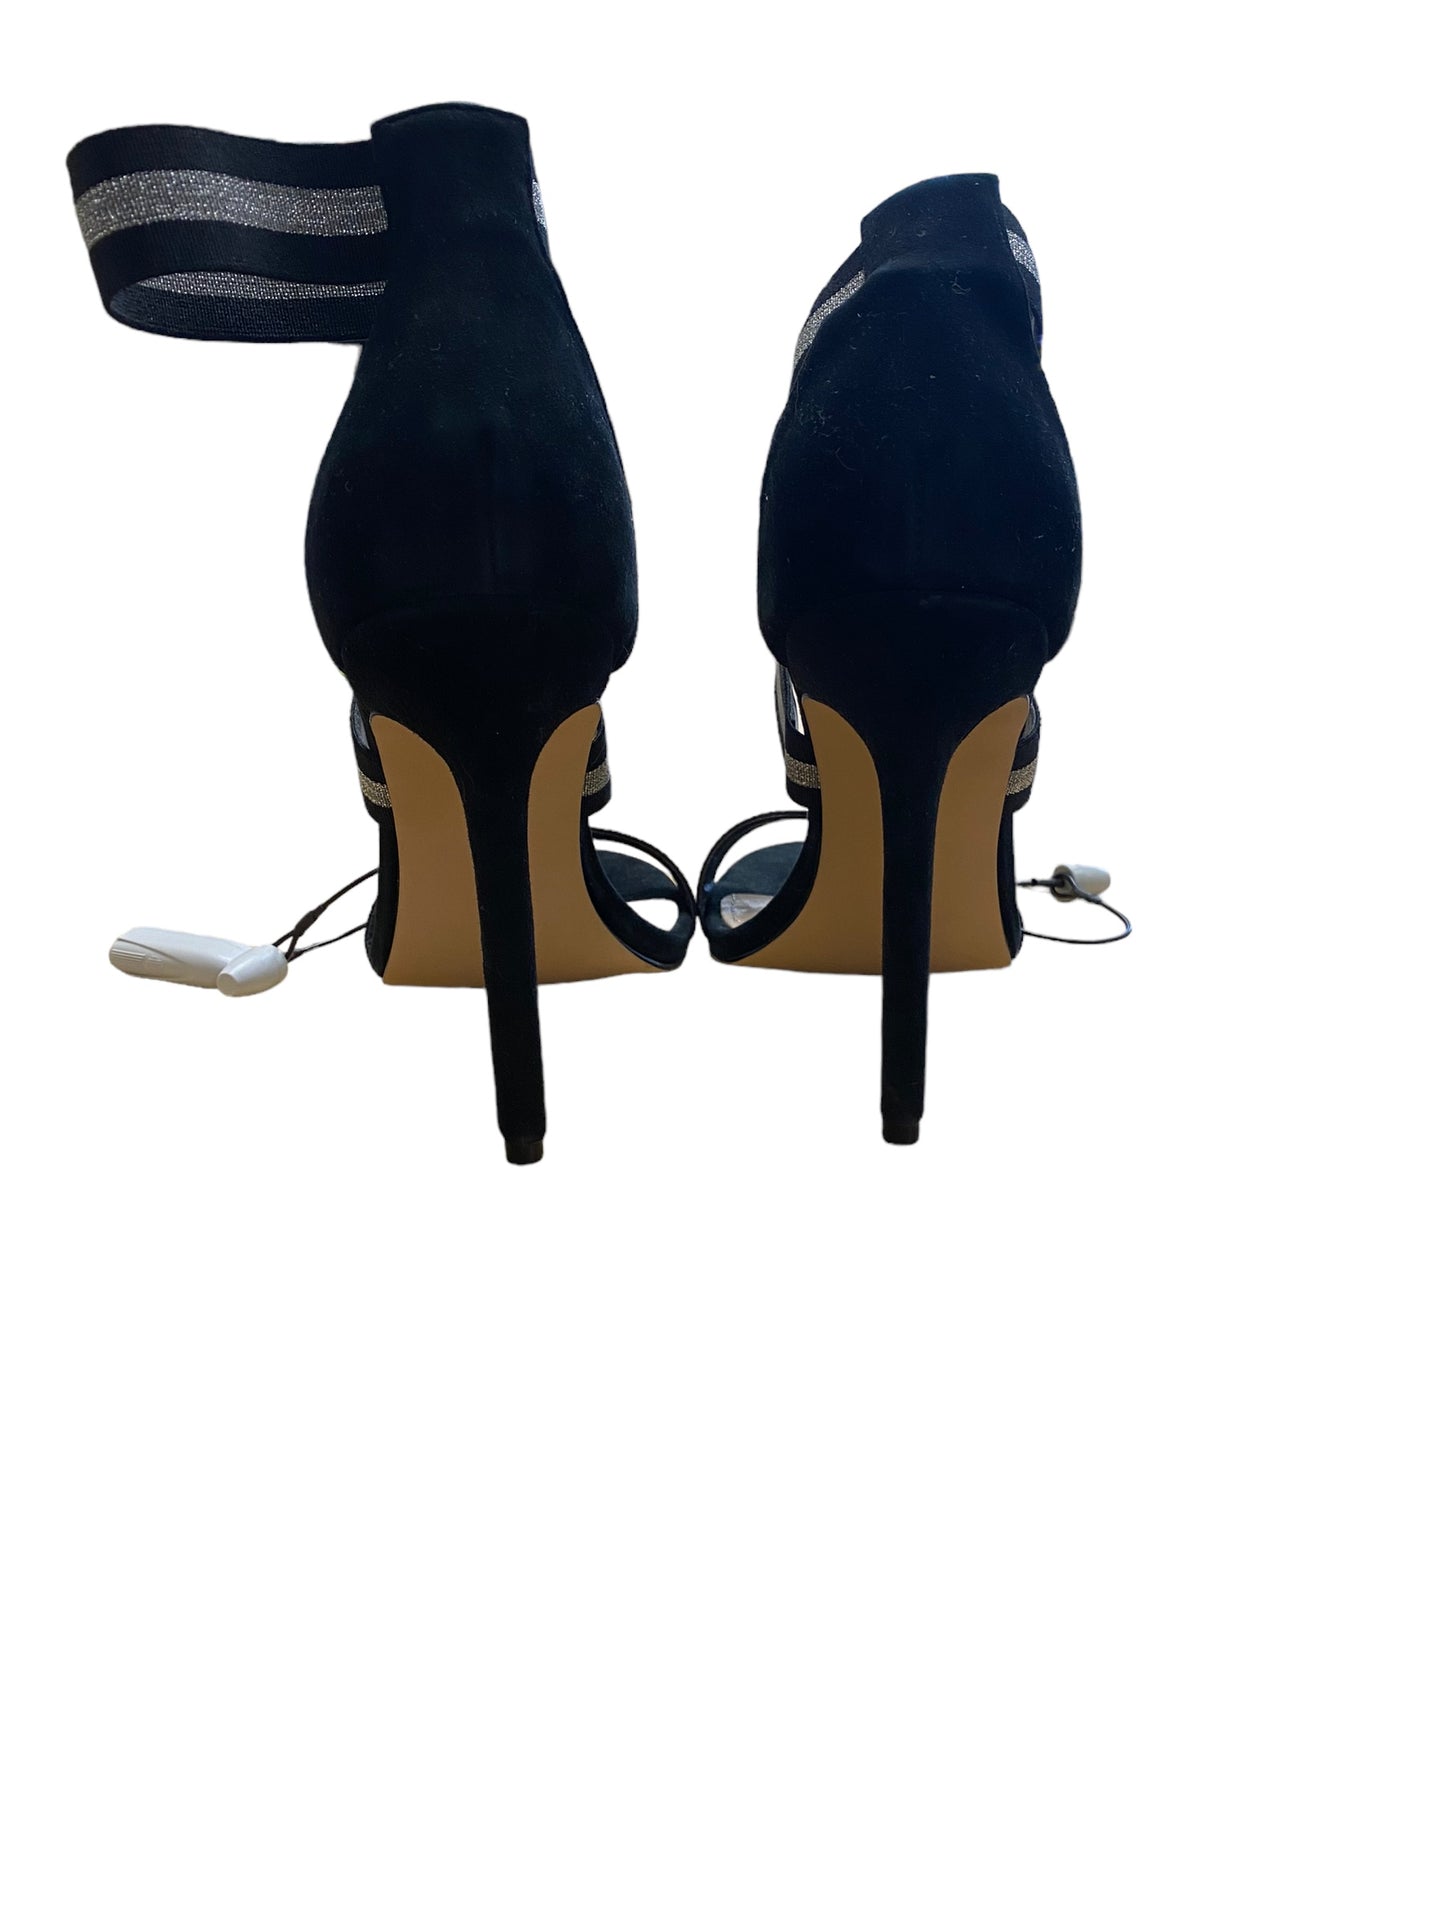 Shoes Heels Stiletto By Steve Madden  Size: 9.5